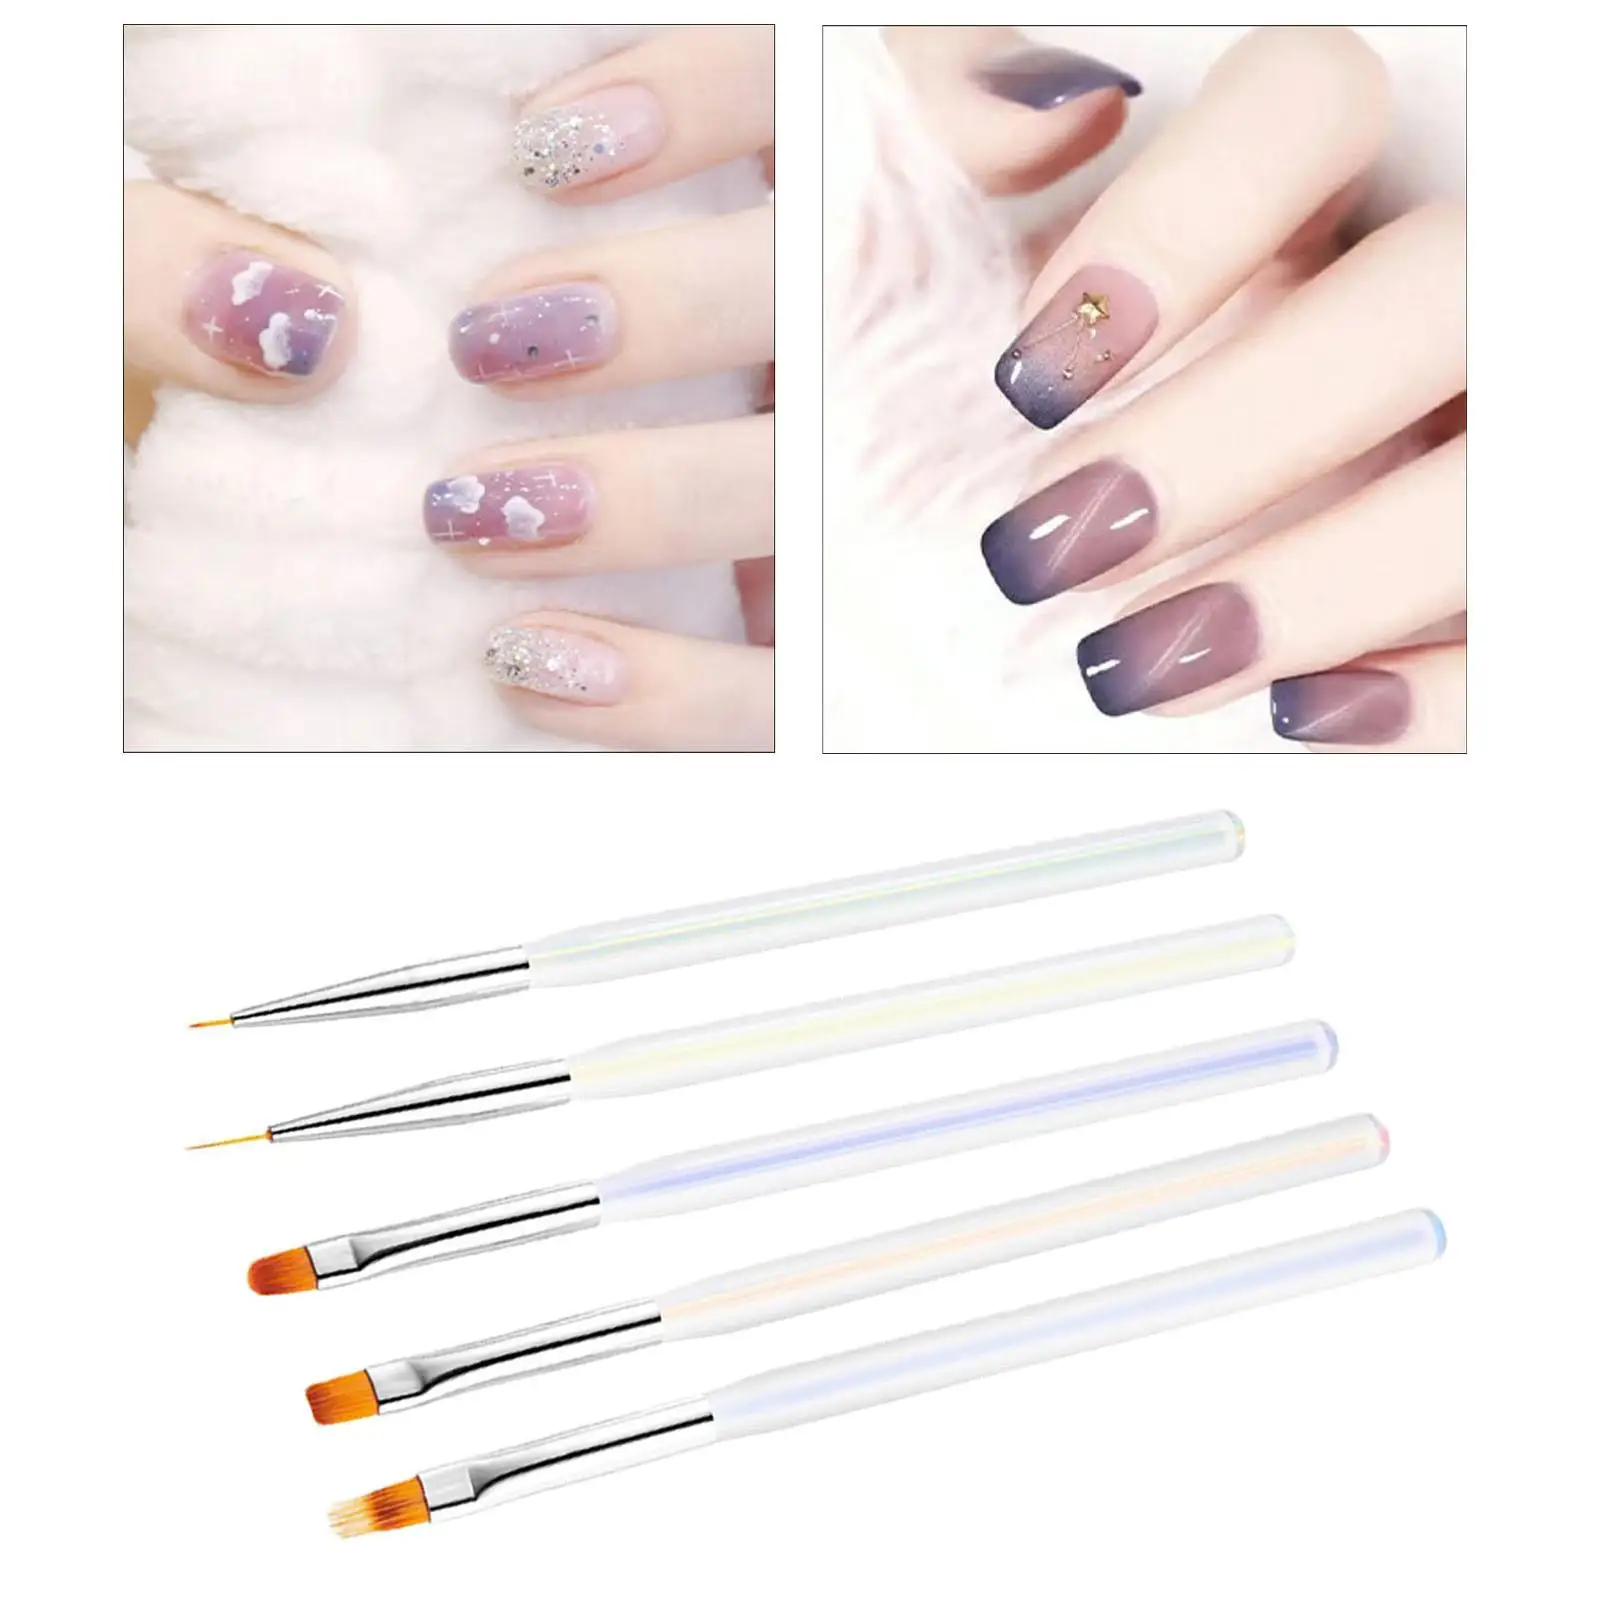 5x Nail Art Drawing Brush Pen Manicure Tool UV Gel Tips Liner Polish Spatula Stick Painting Accessories Dotting for Home DIY